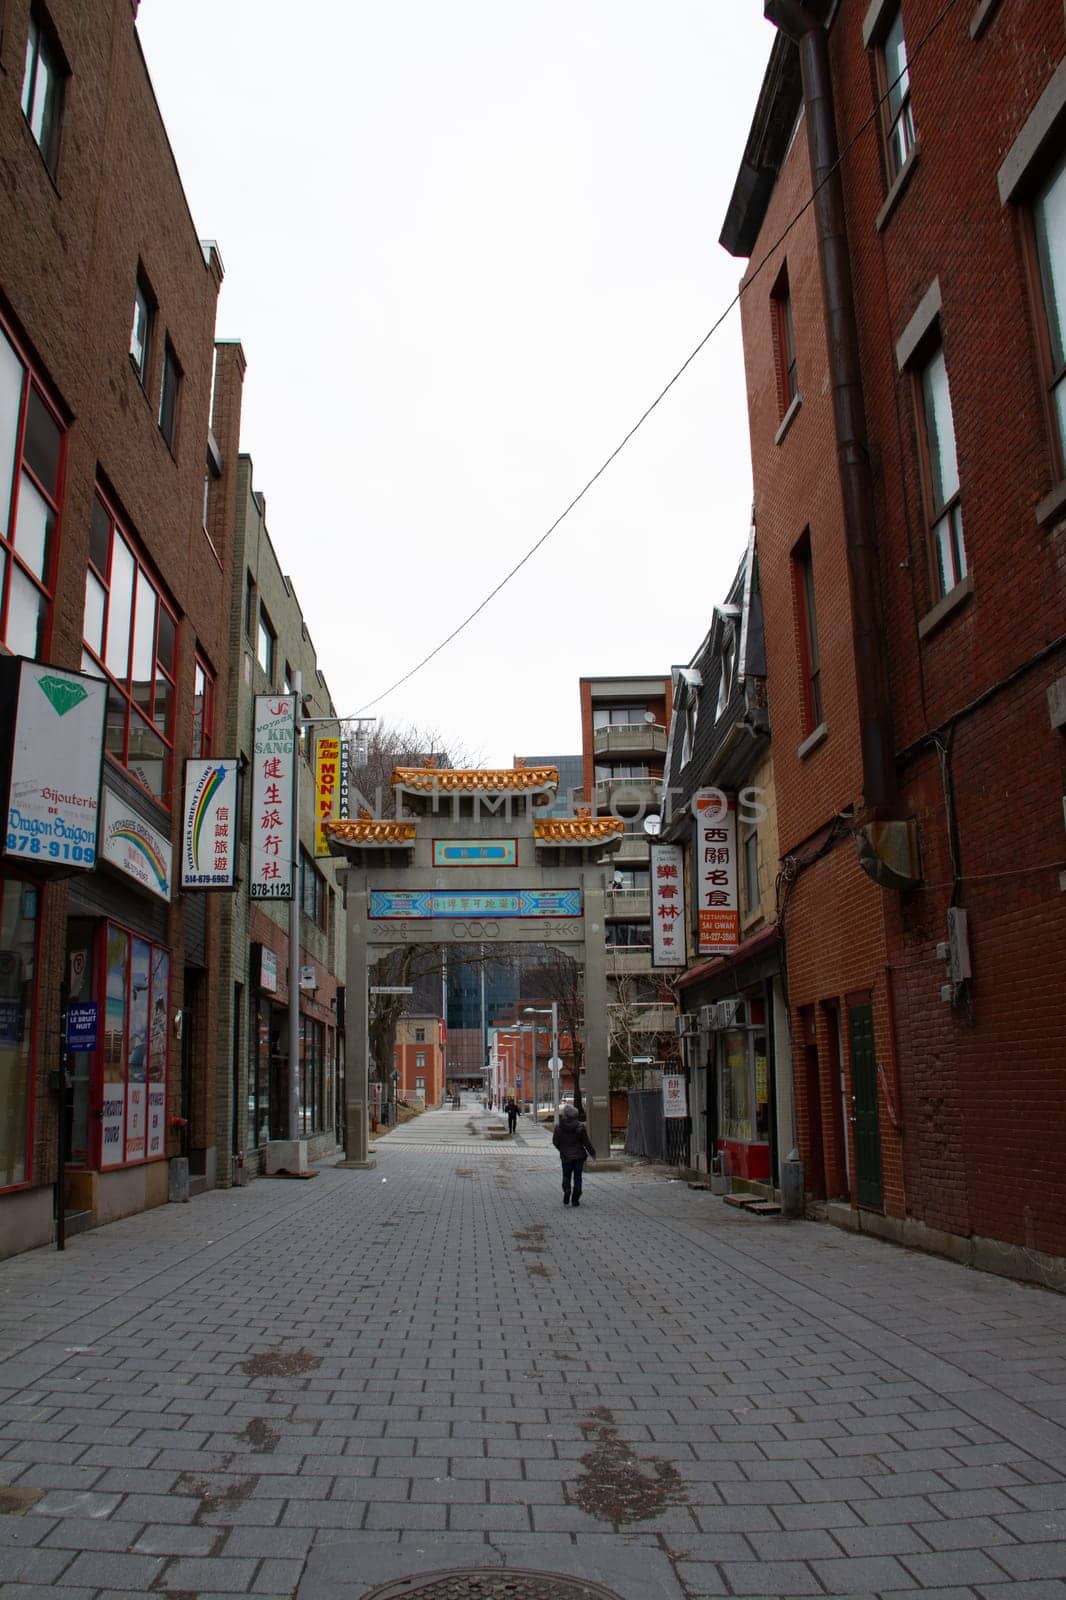 One of many streets in Chinatown near Saint Laurent in Old Montreal, Montreal Quebec Provence